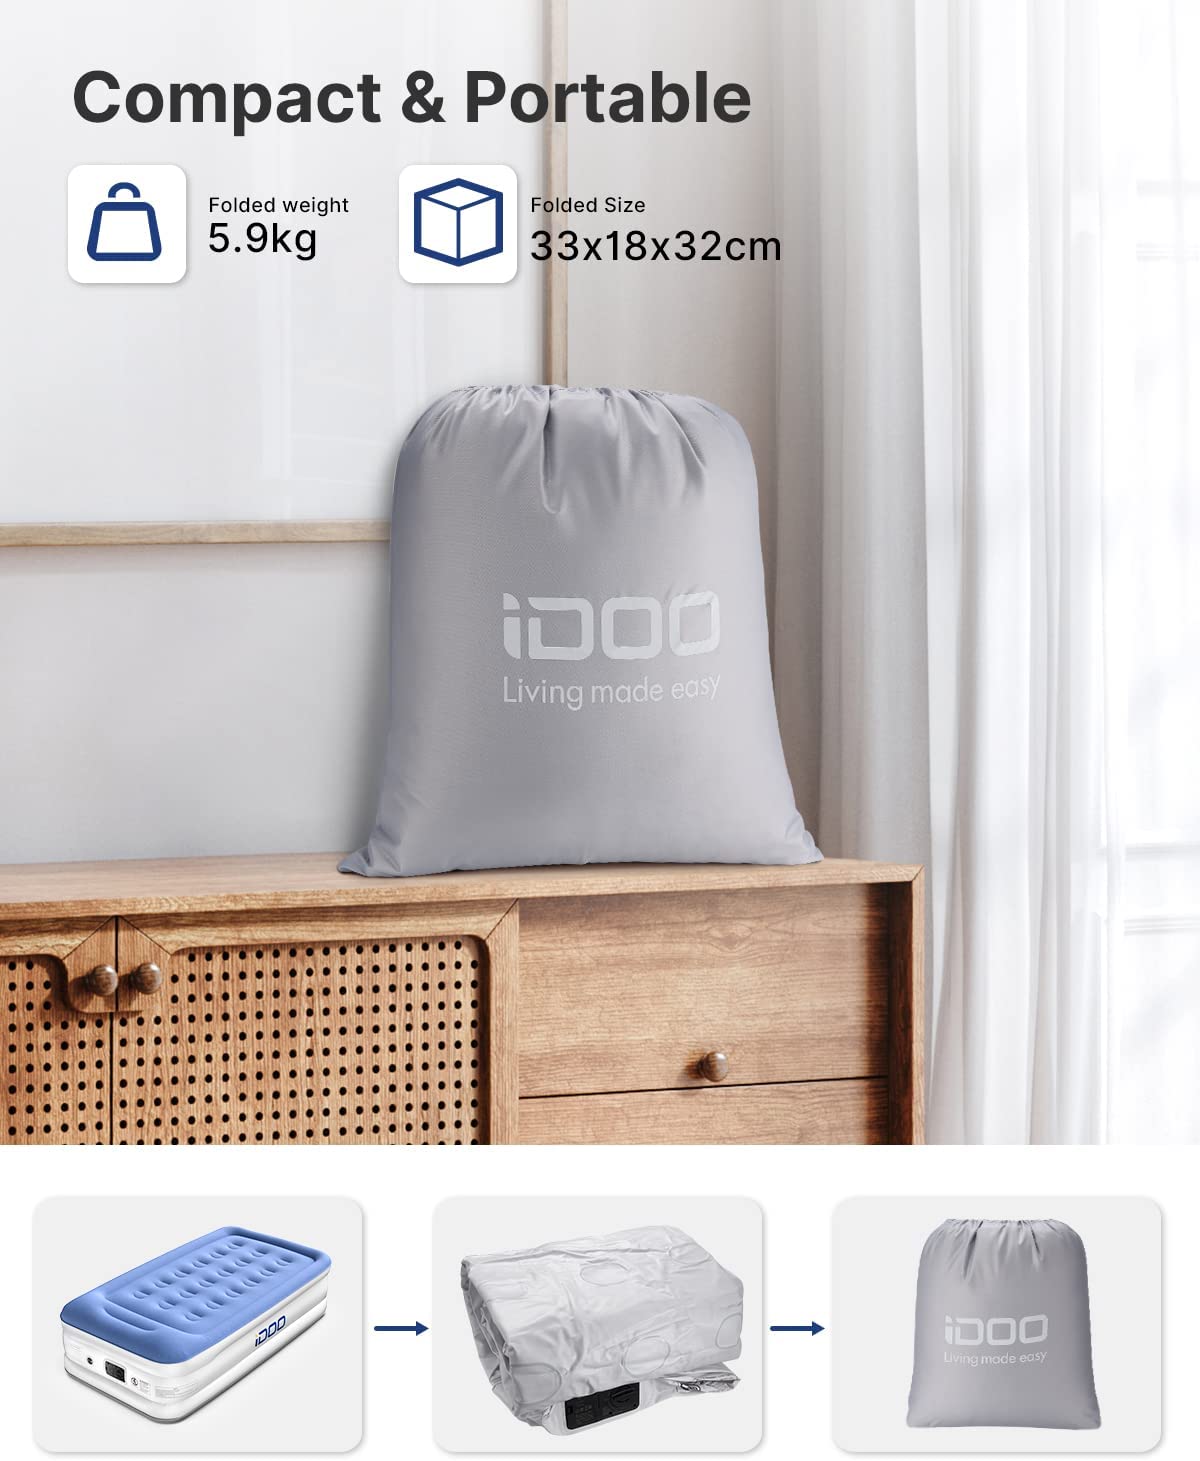 iDOO Single Size Air Bed with Built-in Electric Pump and Pillow